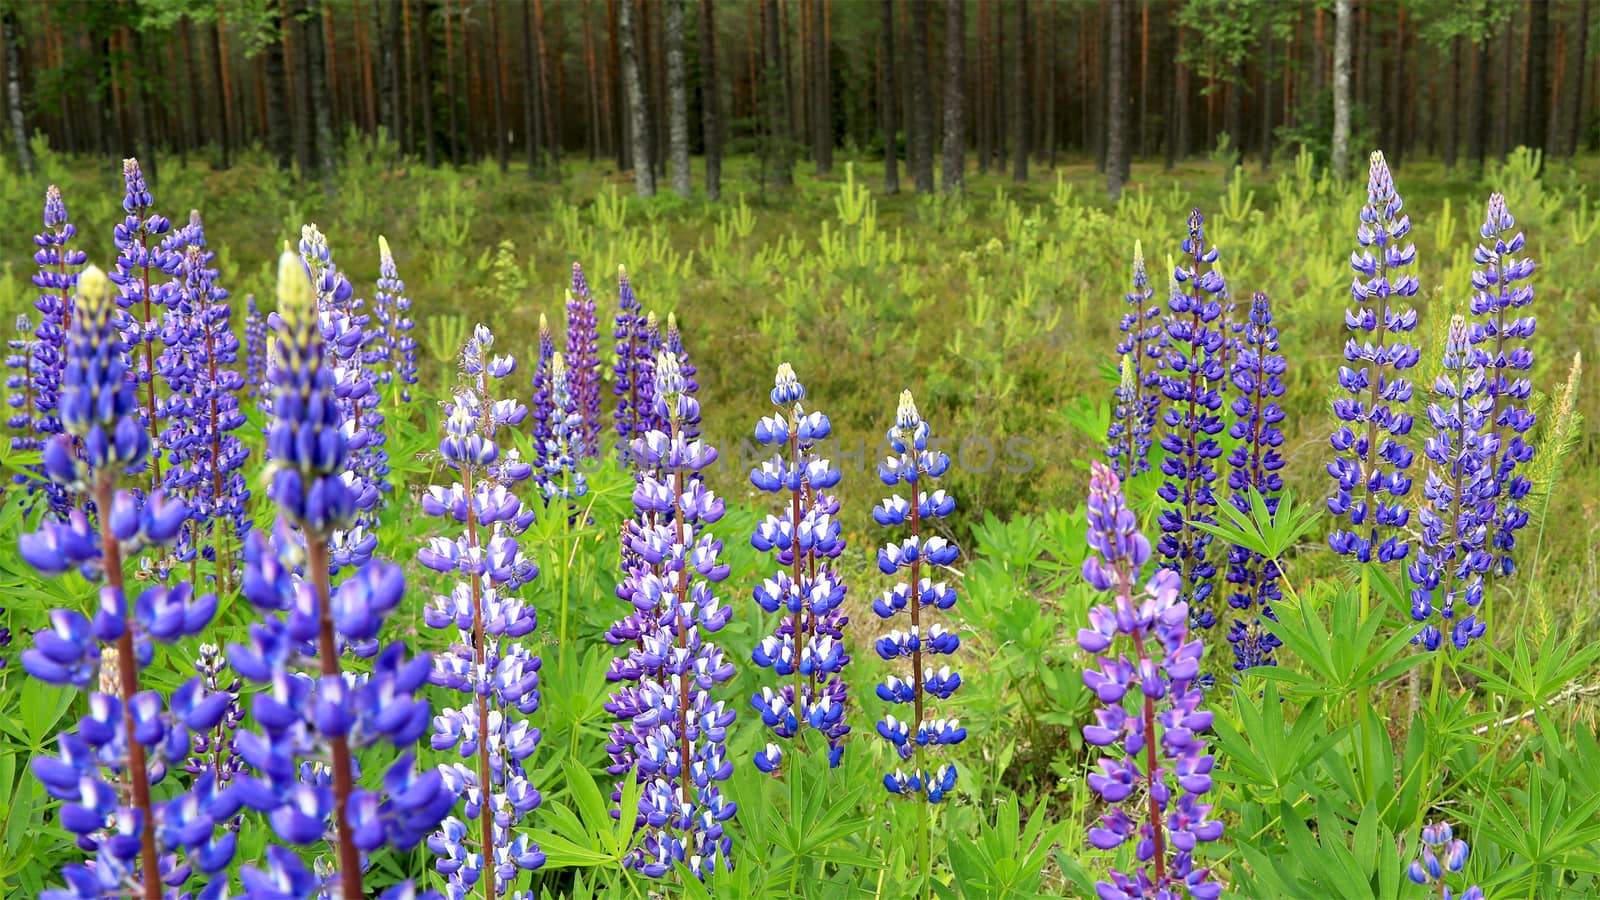 Wild Lupins Blossoming by Green Forest in Finland by Tainas